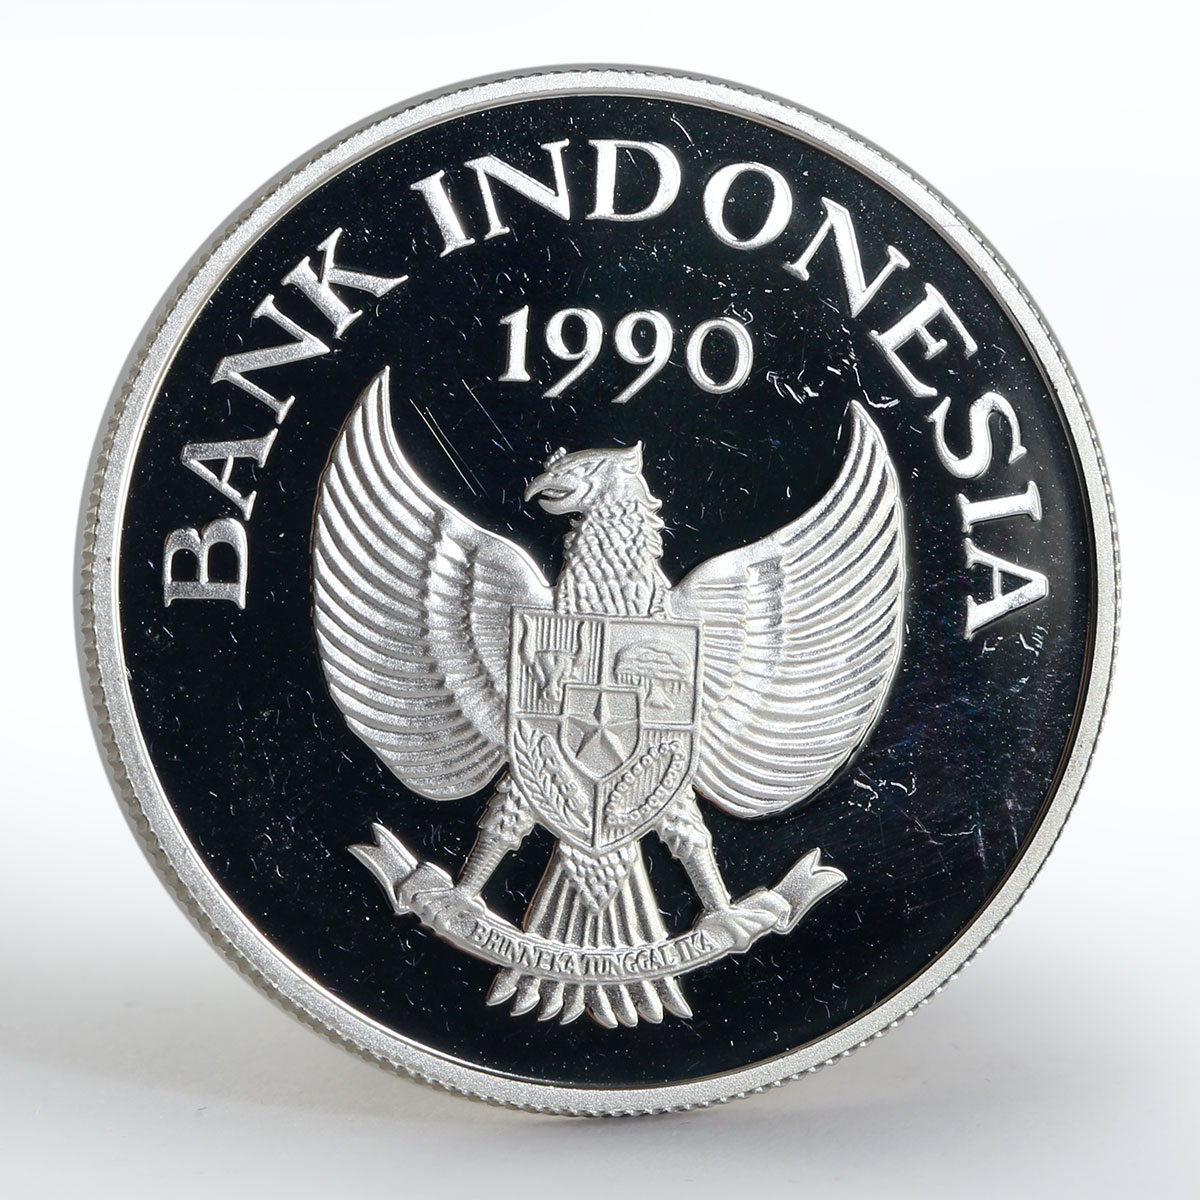 Indonesia 10 000 Rupiah Save the Children proof silver coin 1990